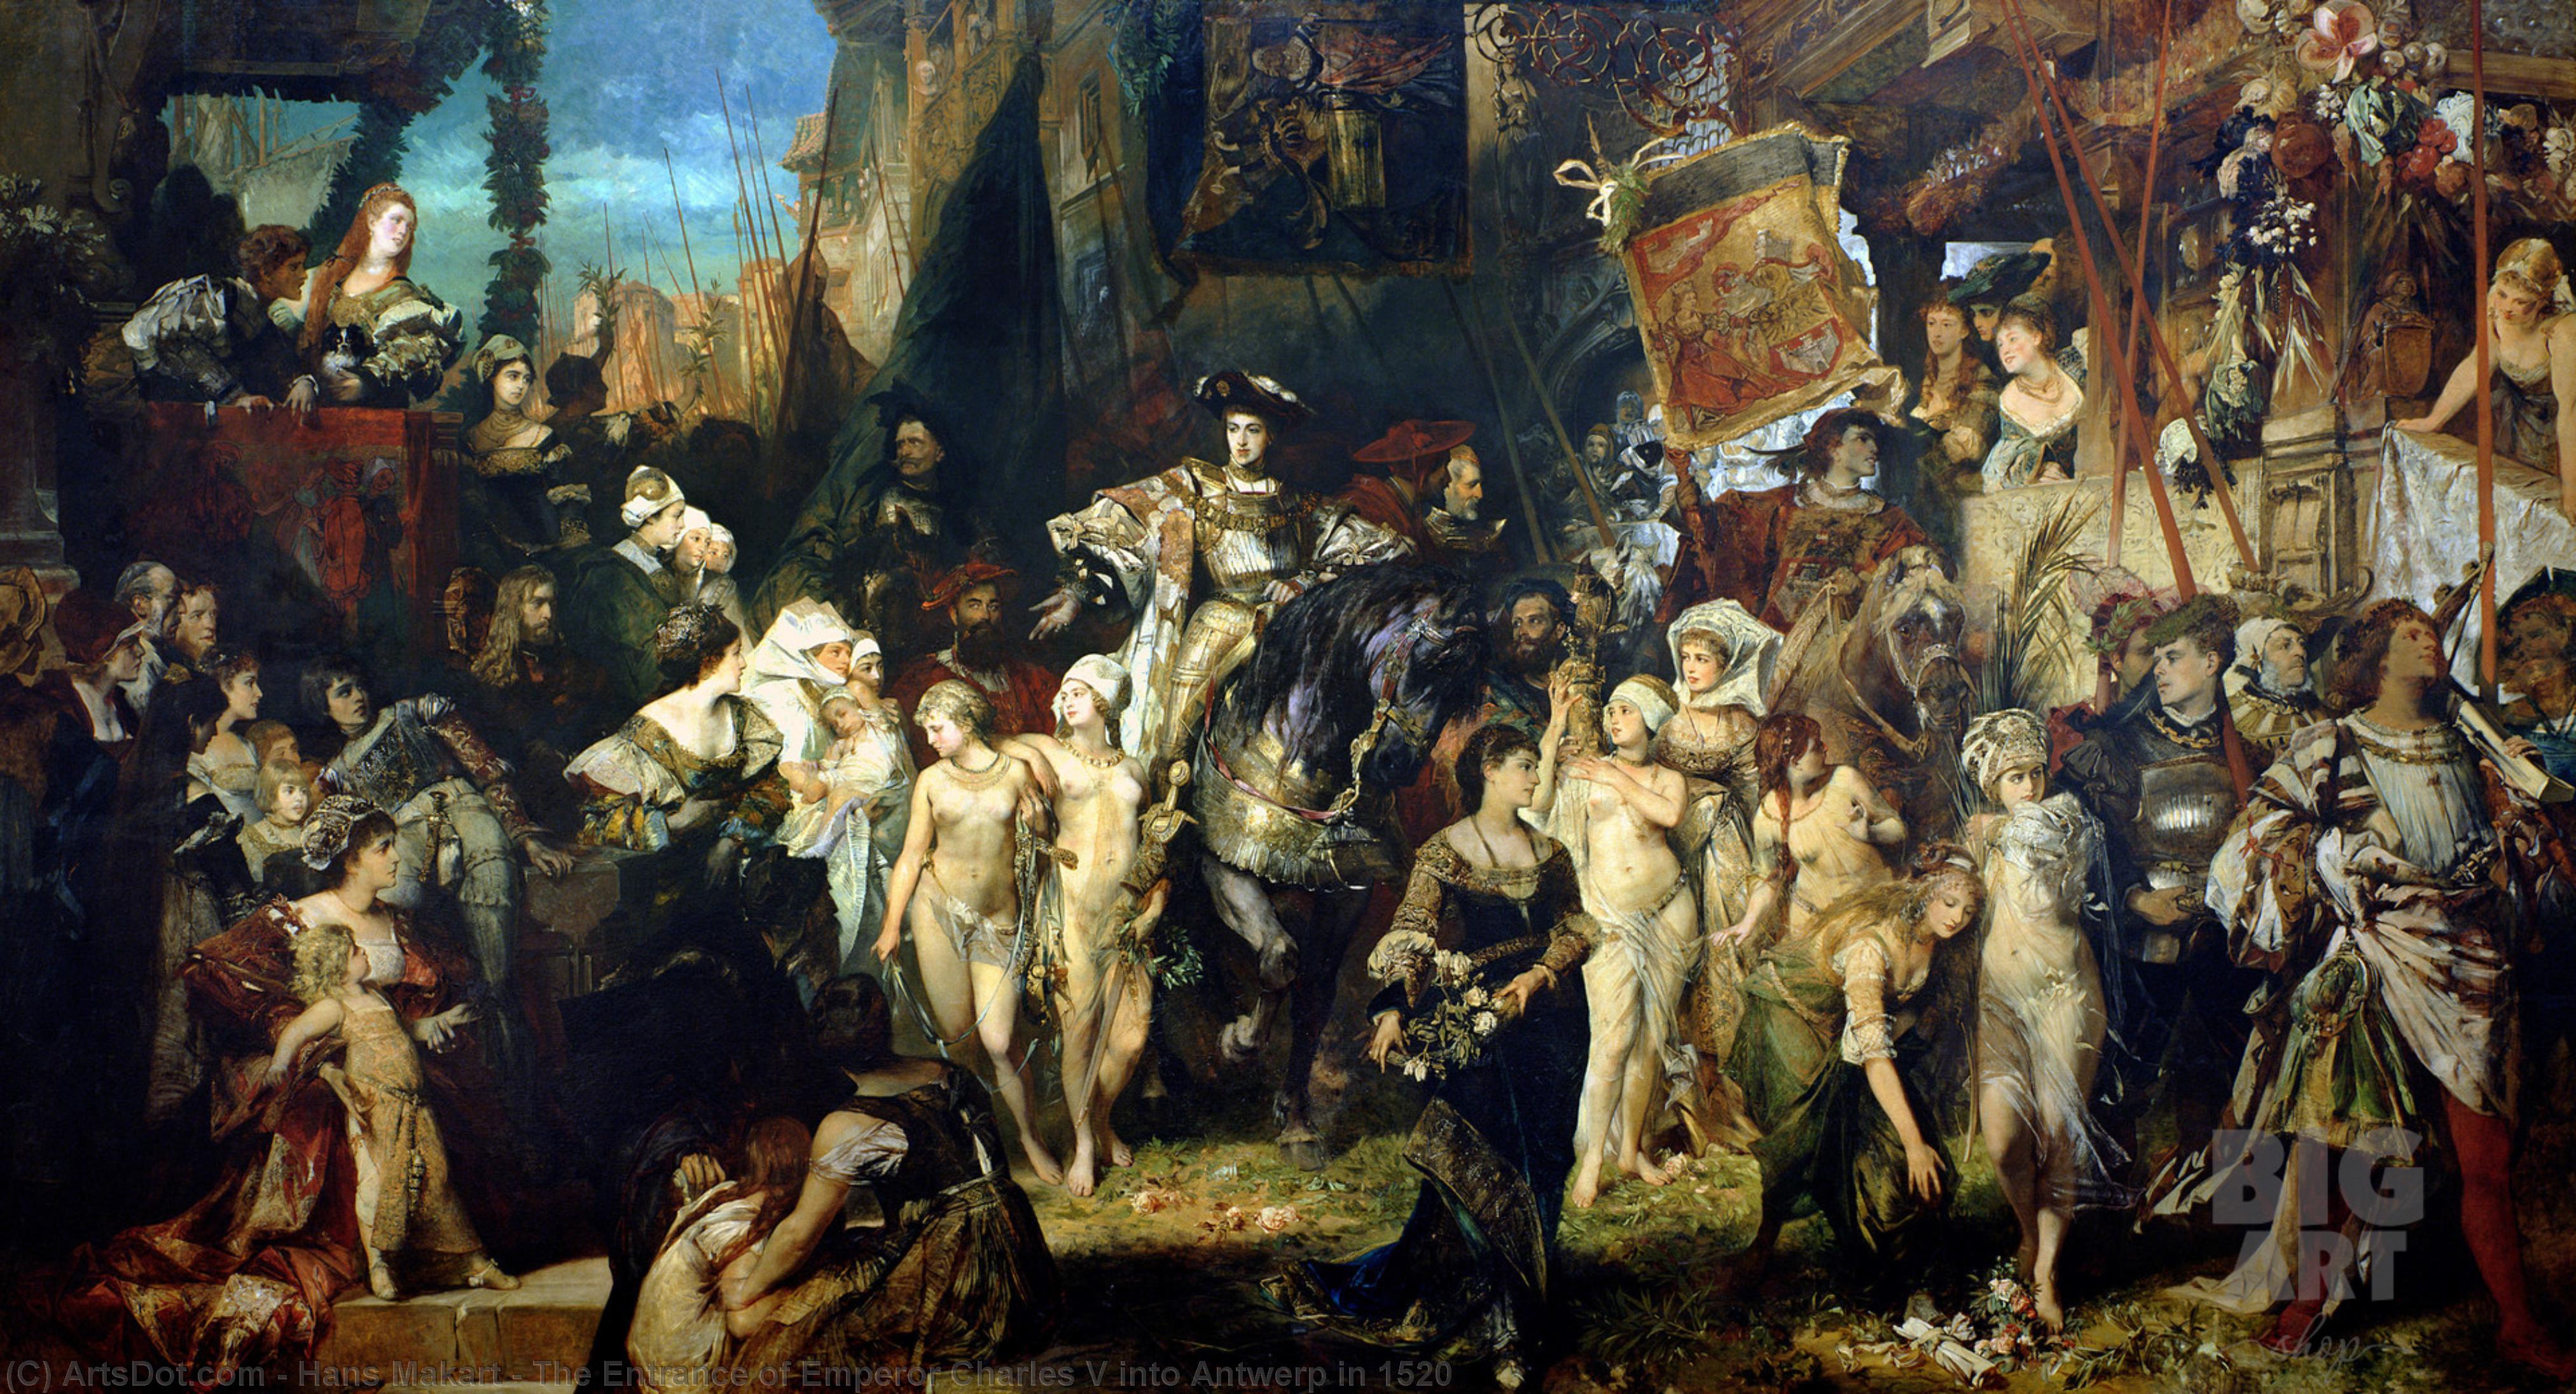 WikiOO.org - 백과 사전 - 회화, 삽화 Hans Makart - The Entrance of Emperor Charles V into Antwerp in 1520